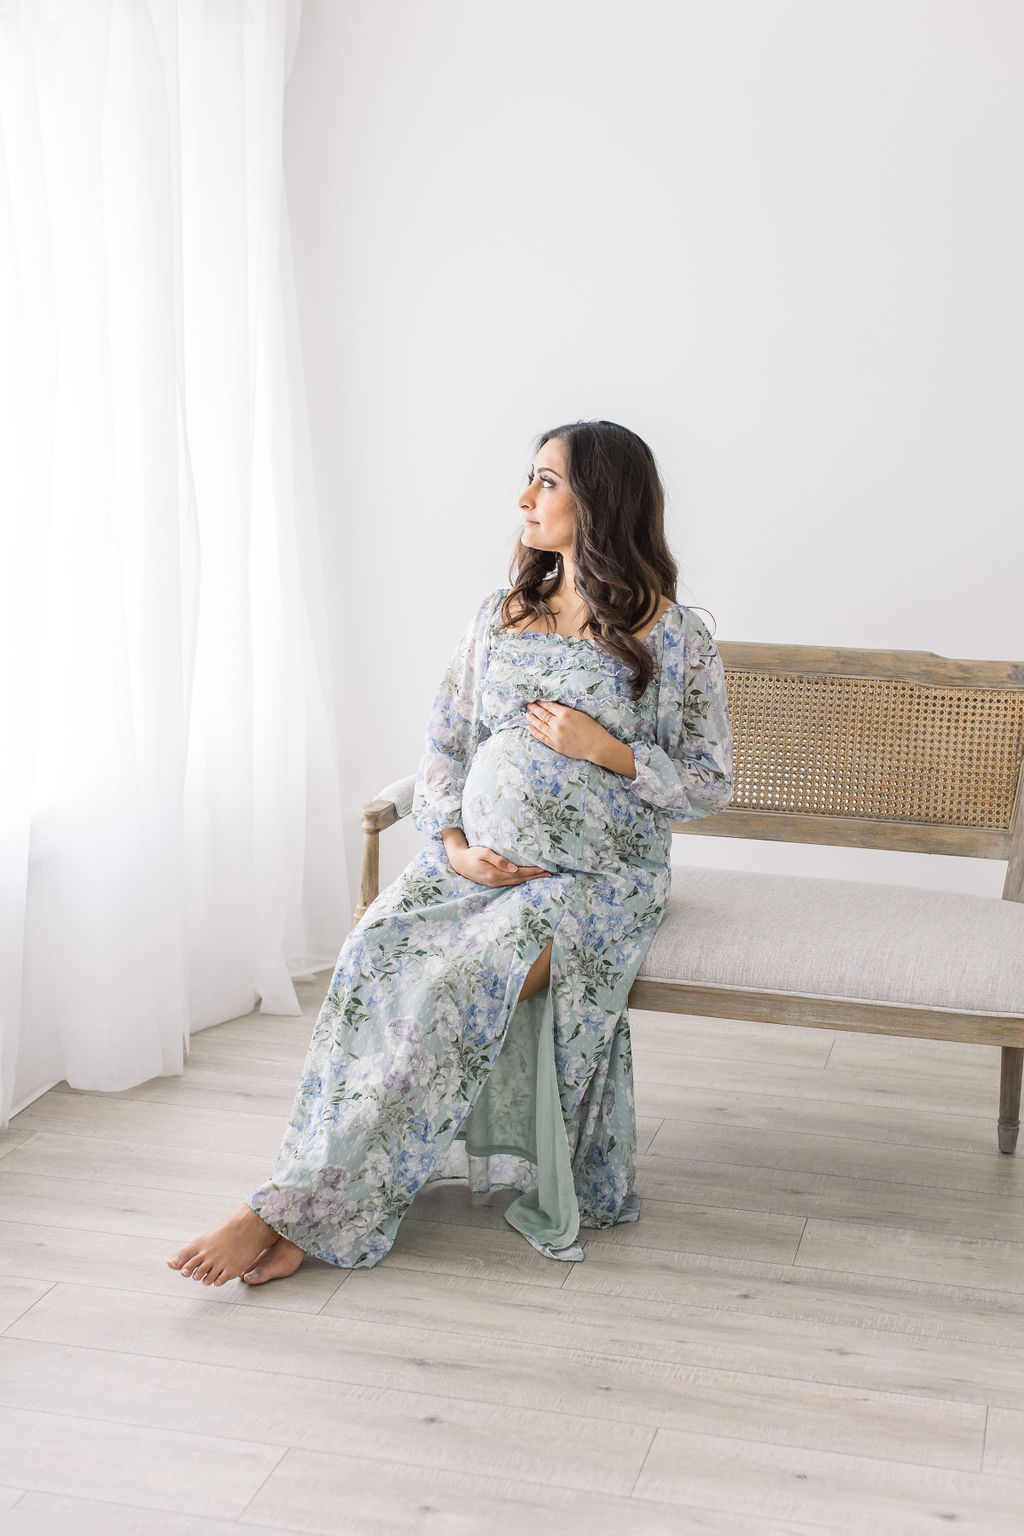 A mother to be sits on a bench in a studio holding her bump and looking out a window